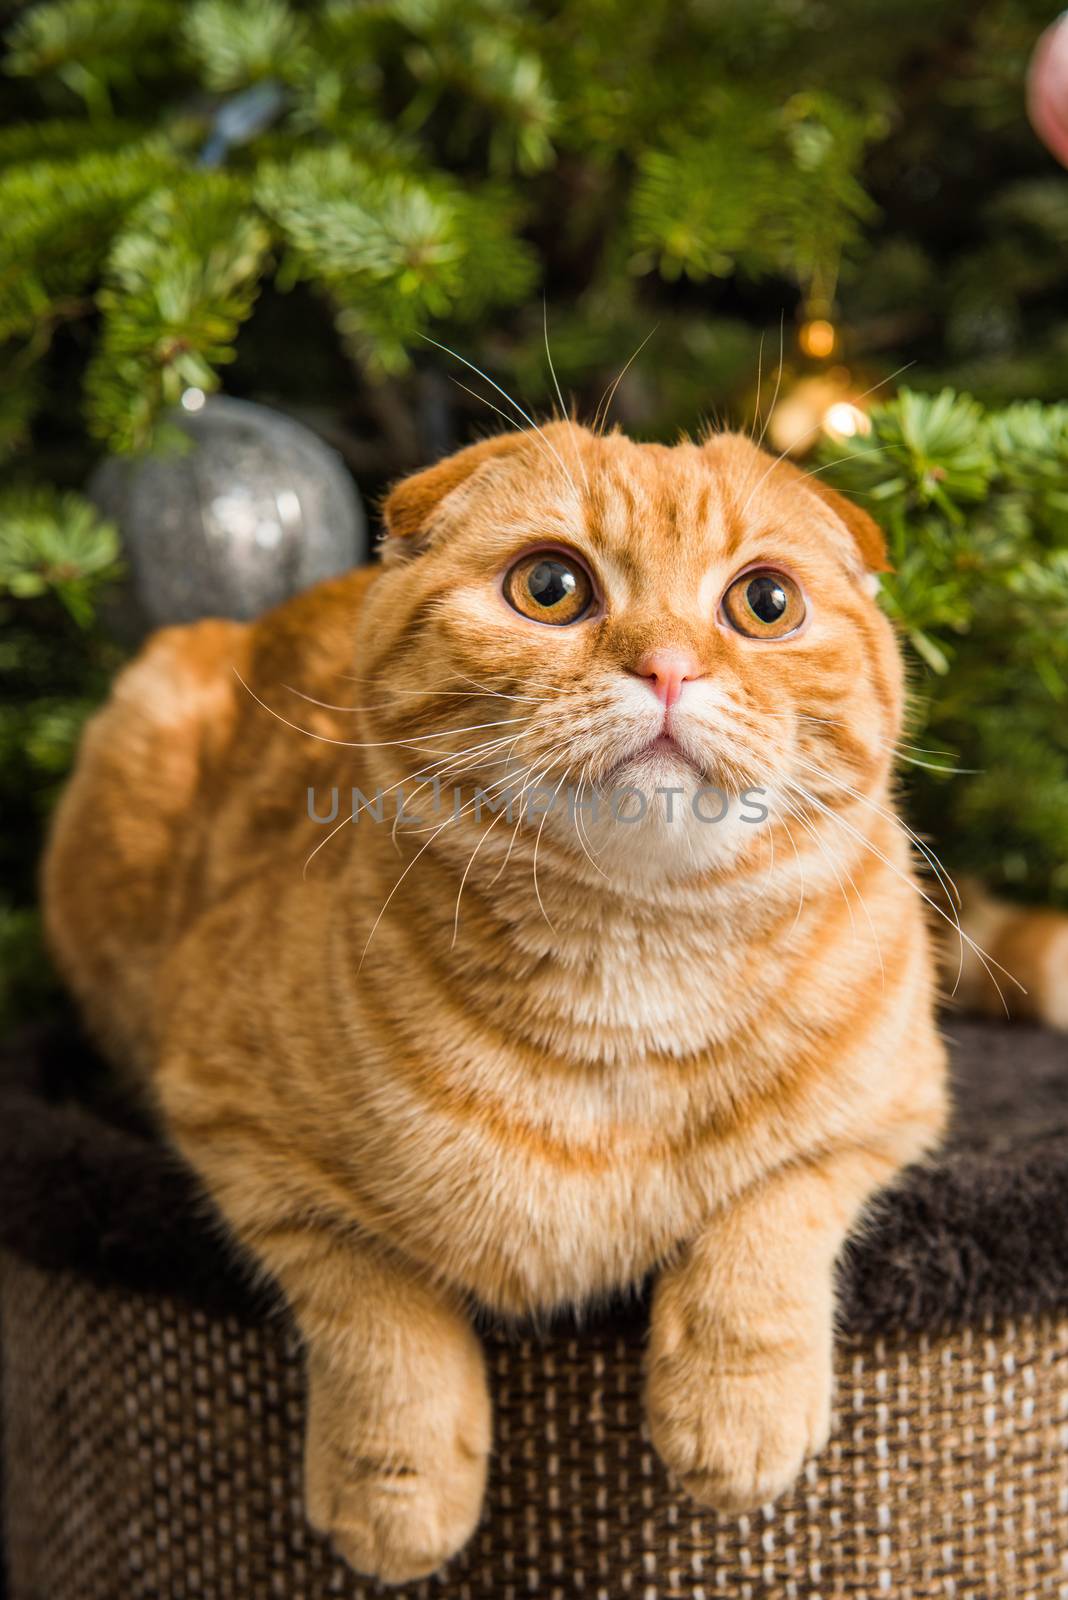 Red Scottish Fold red cat is sitting near Christmas tree